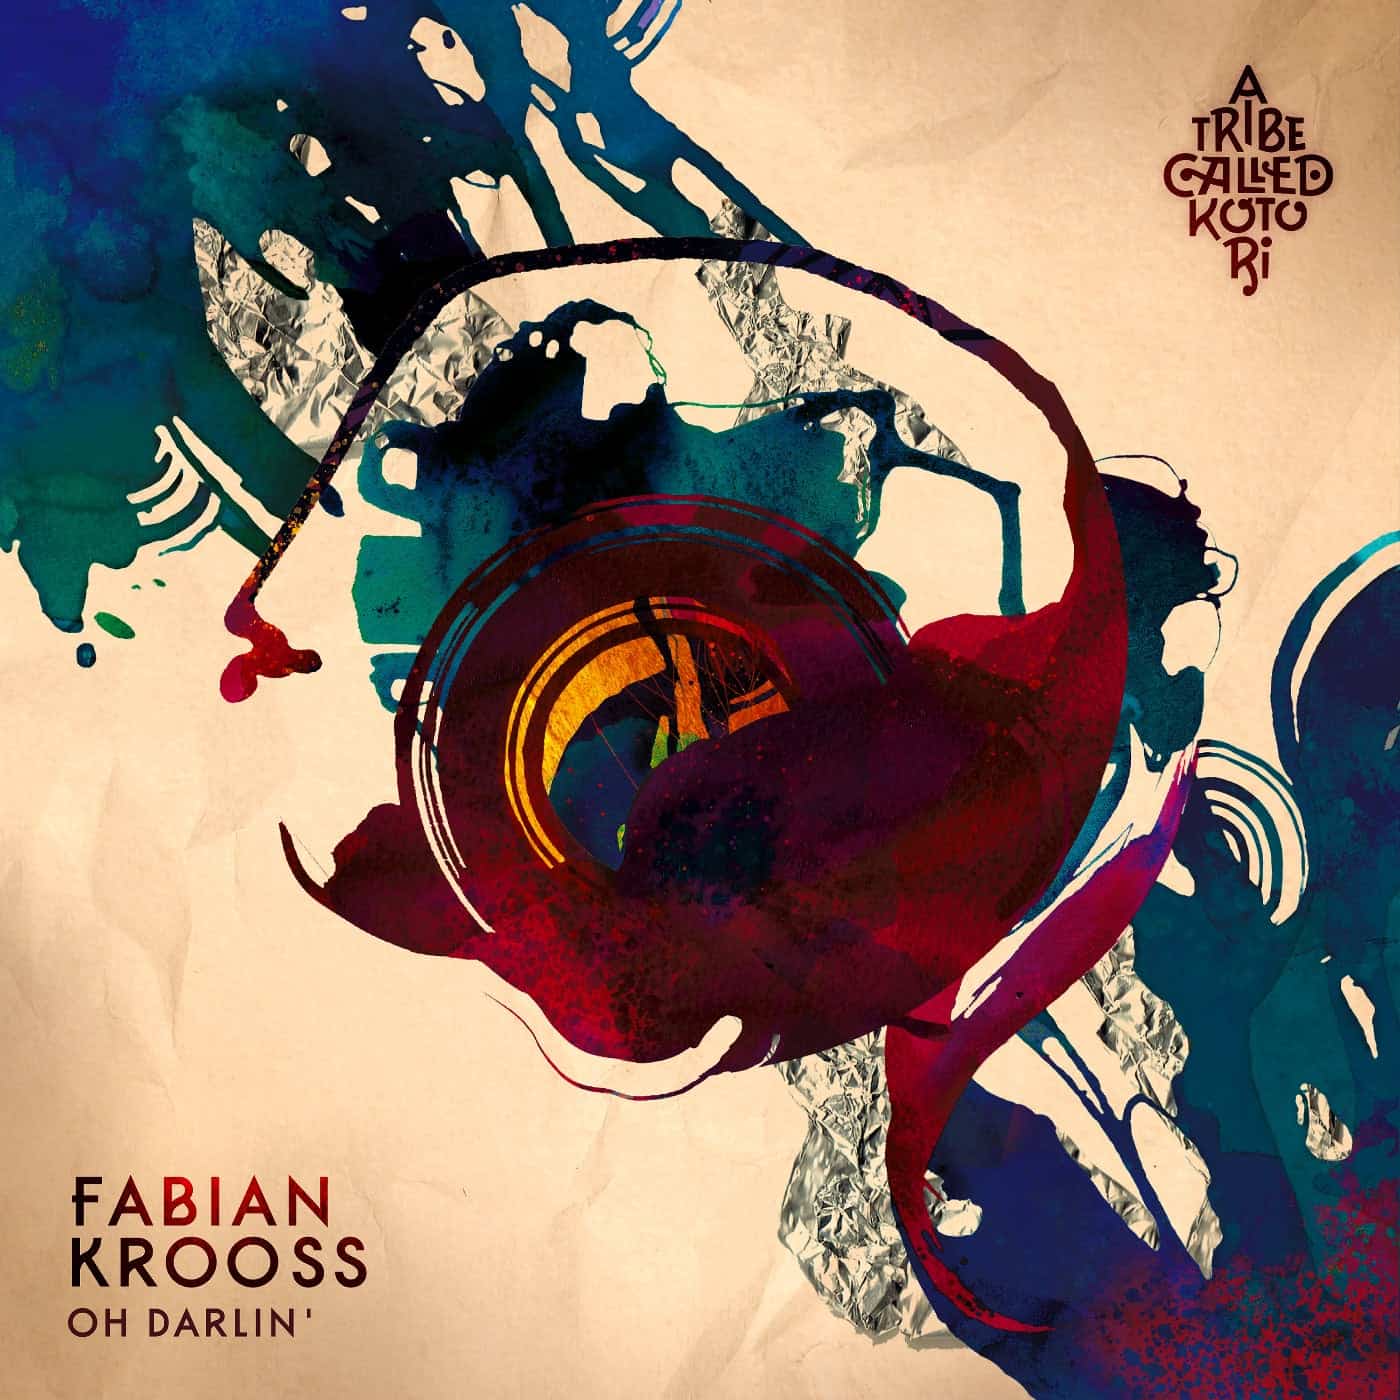 image cover: Fabian Krooss - Oh Darlin' on A Tribe Called Kotori